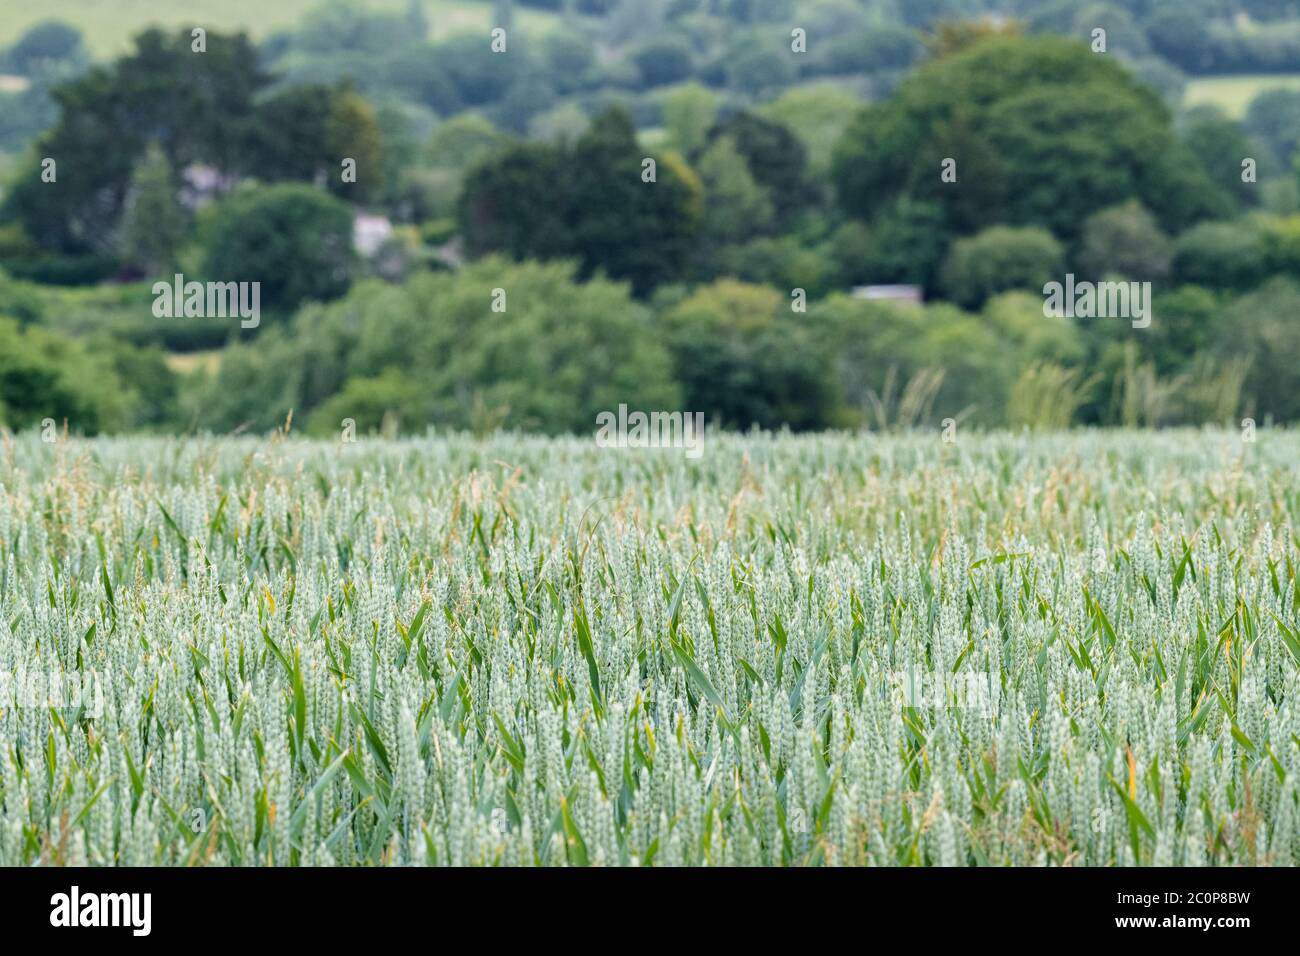 Ripening green wheat / Triticum crop in UK field & buildings behind. Food security, UK agriculture and farming, food growing in the field. Narrow DoF Stock Photo